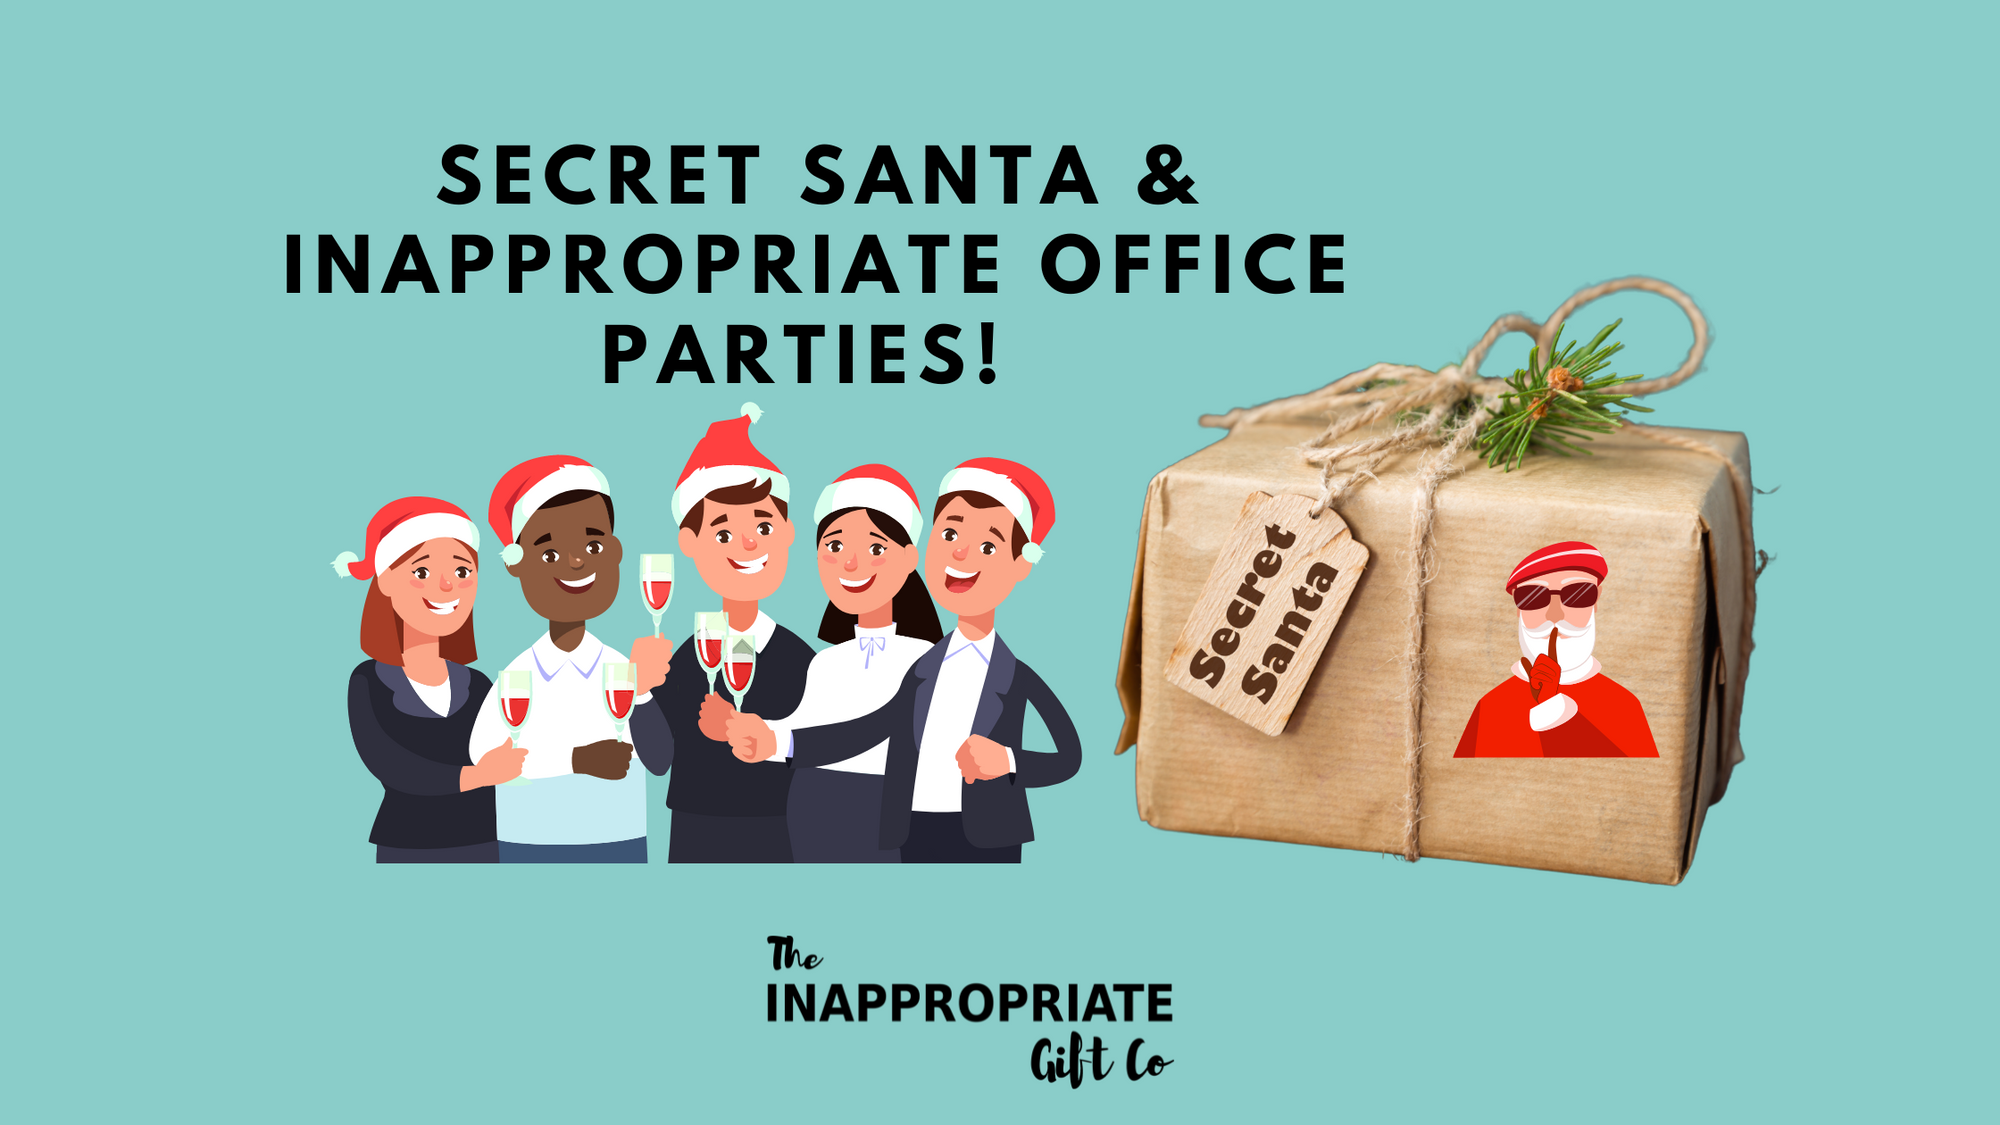 Secret Santa Gifts and Inappropriate Office Parties!